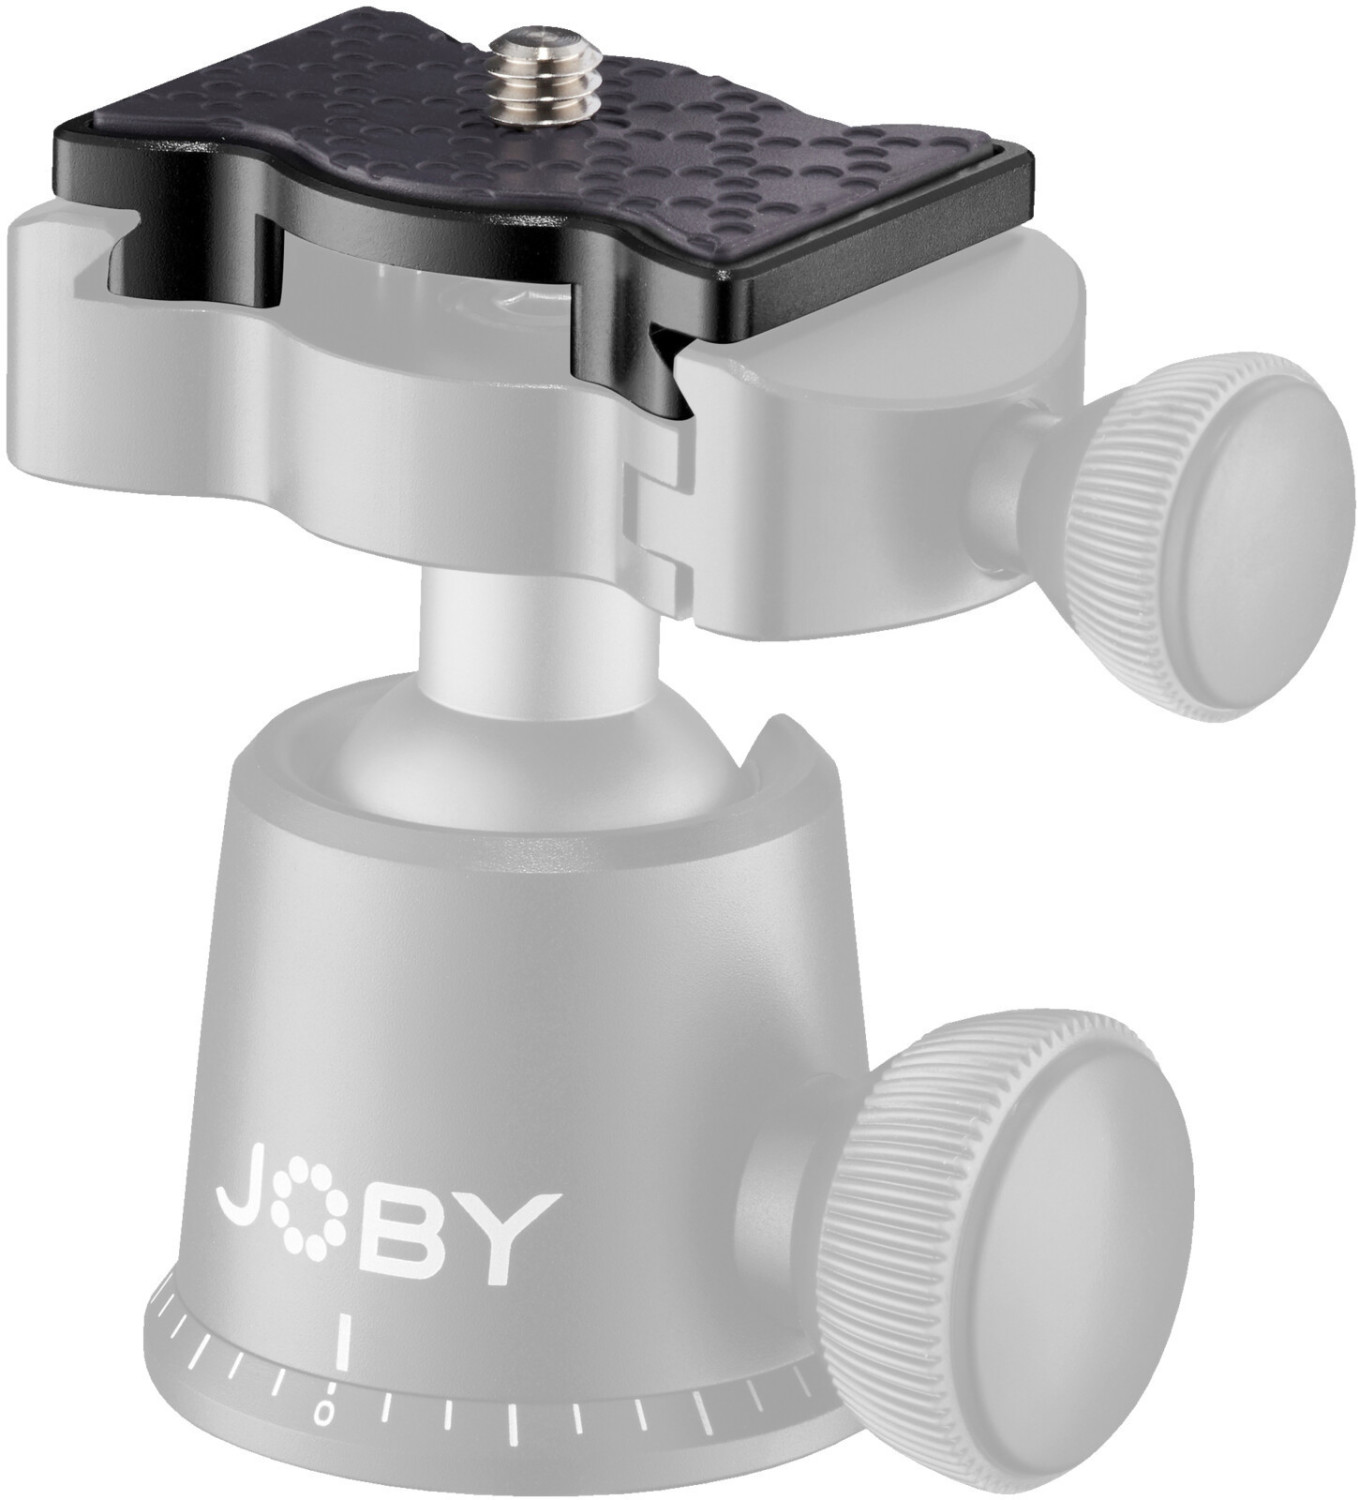 Photos - Other photo accessories Joby QR Plate 3K PRO 